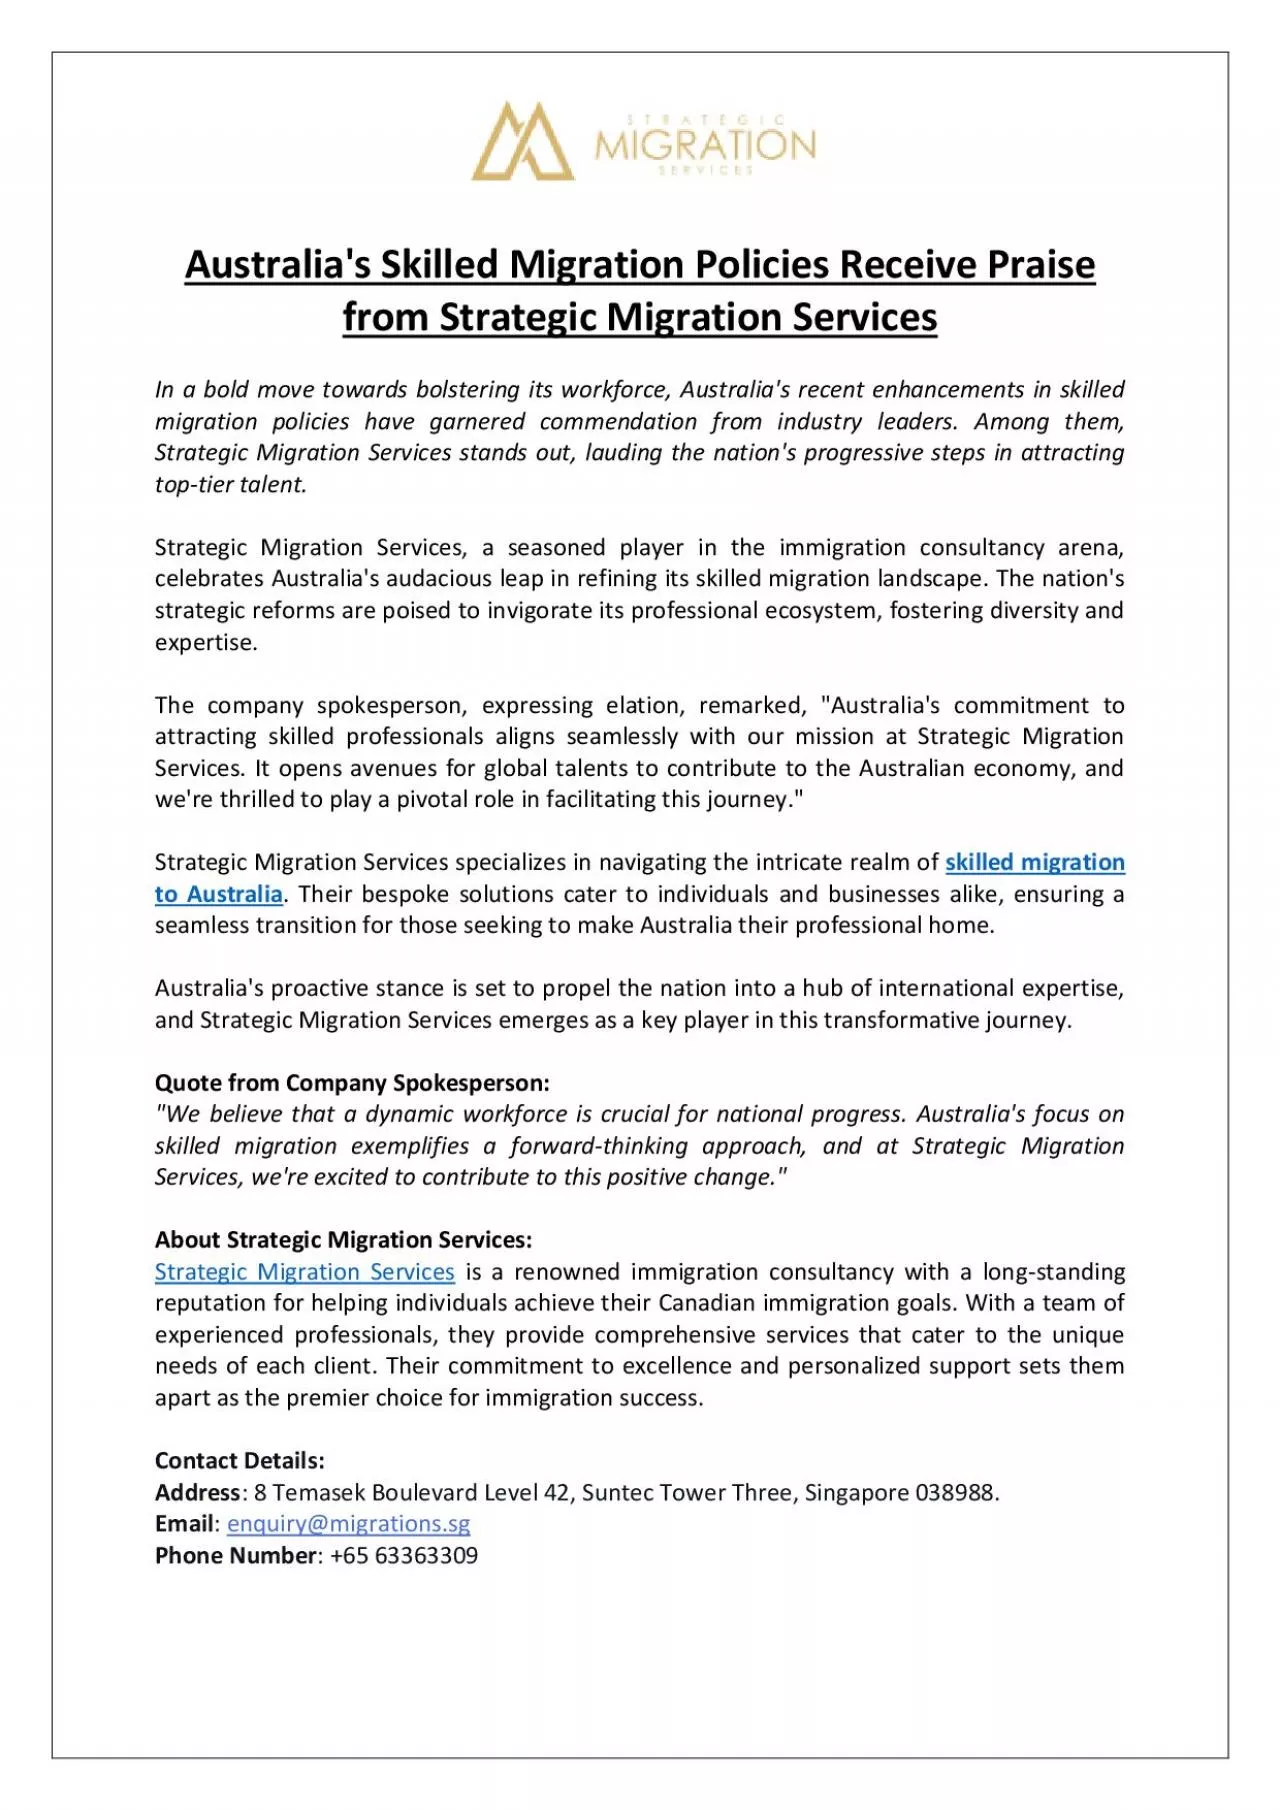 Australia\'s Skilled Migration Policies Receive Praise from Strategic Migration Services